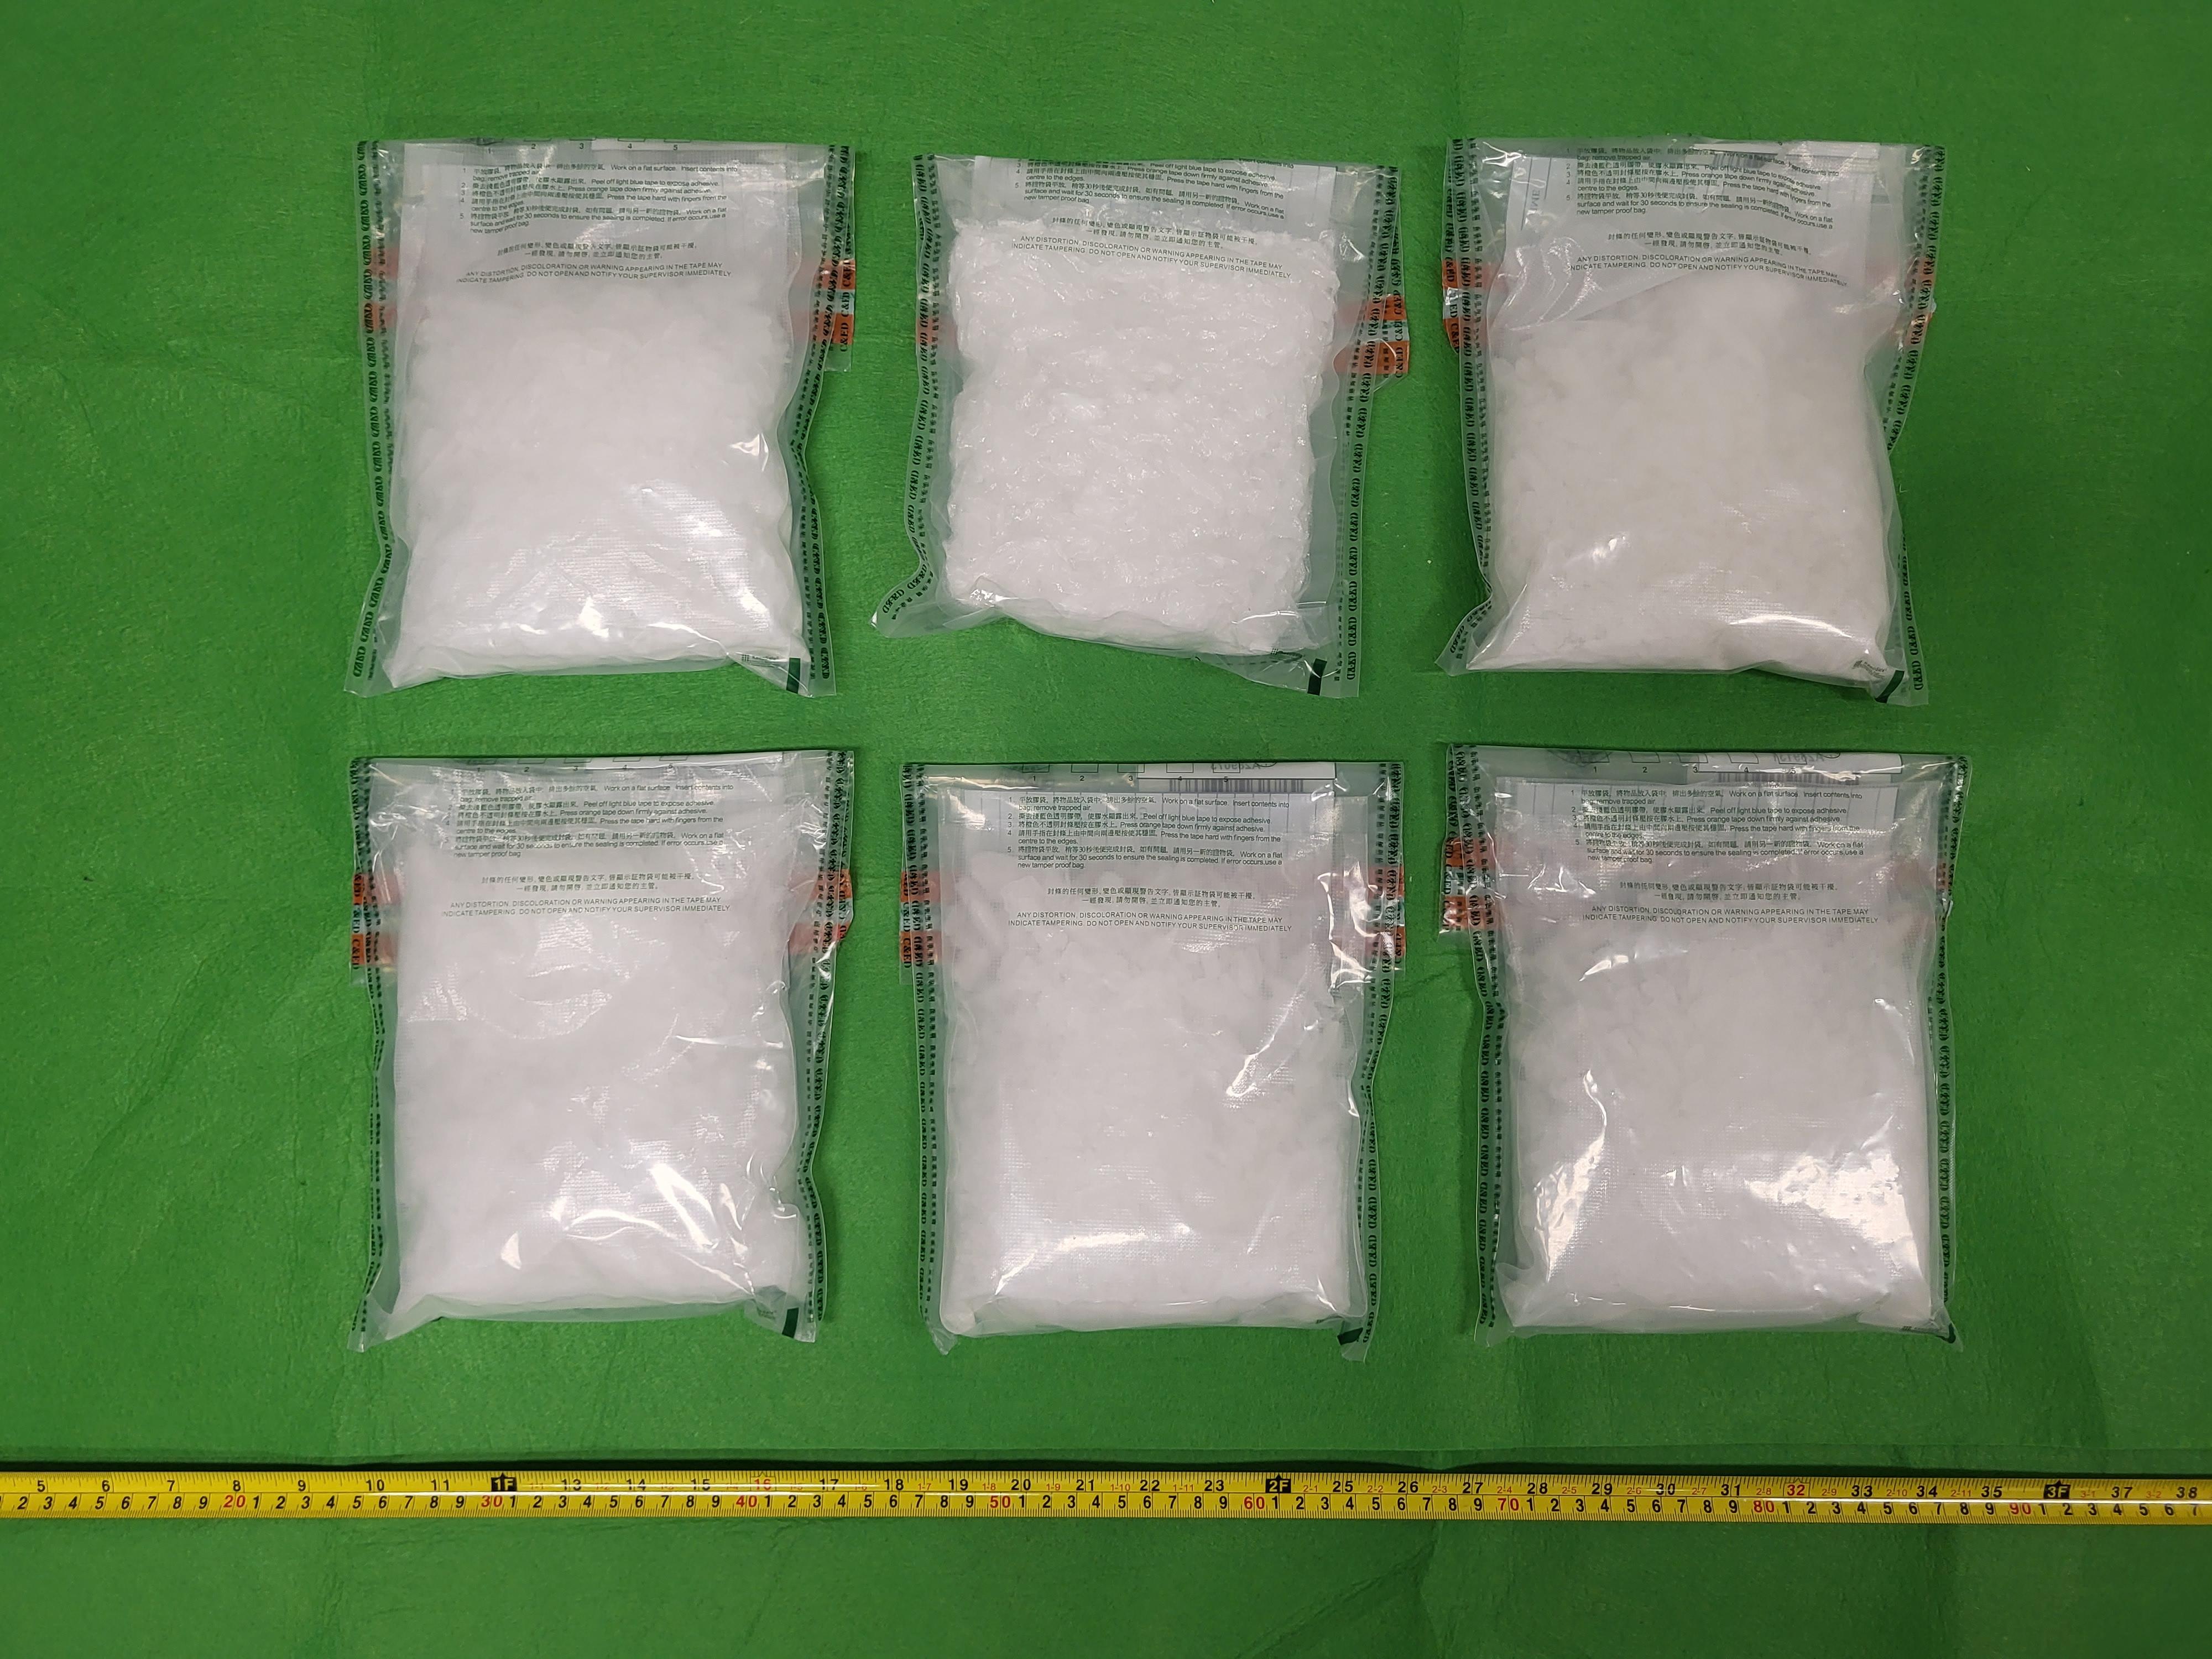 Hong Kong Customs on November 14 seized about 3 kilograms of suspected methamphetamine with an estimated market value of about $1.9 million at Hong Kong International Airport. Photo shows the suspected methamphetamine seized.